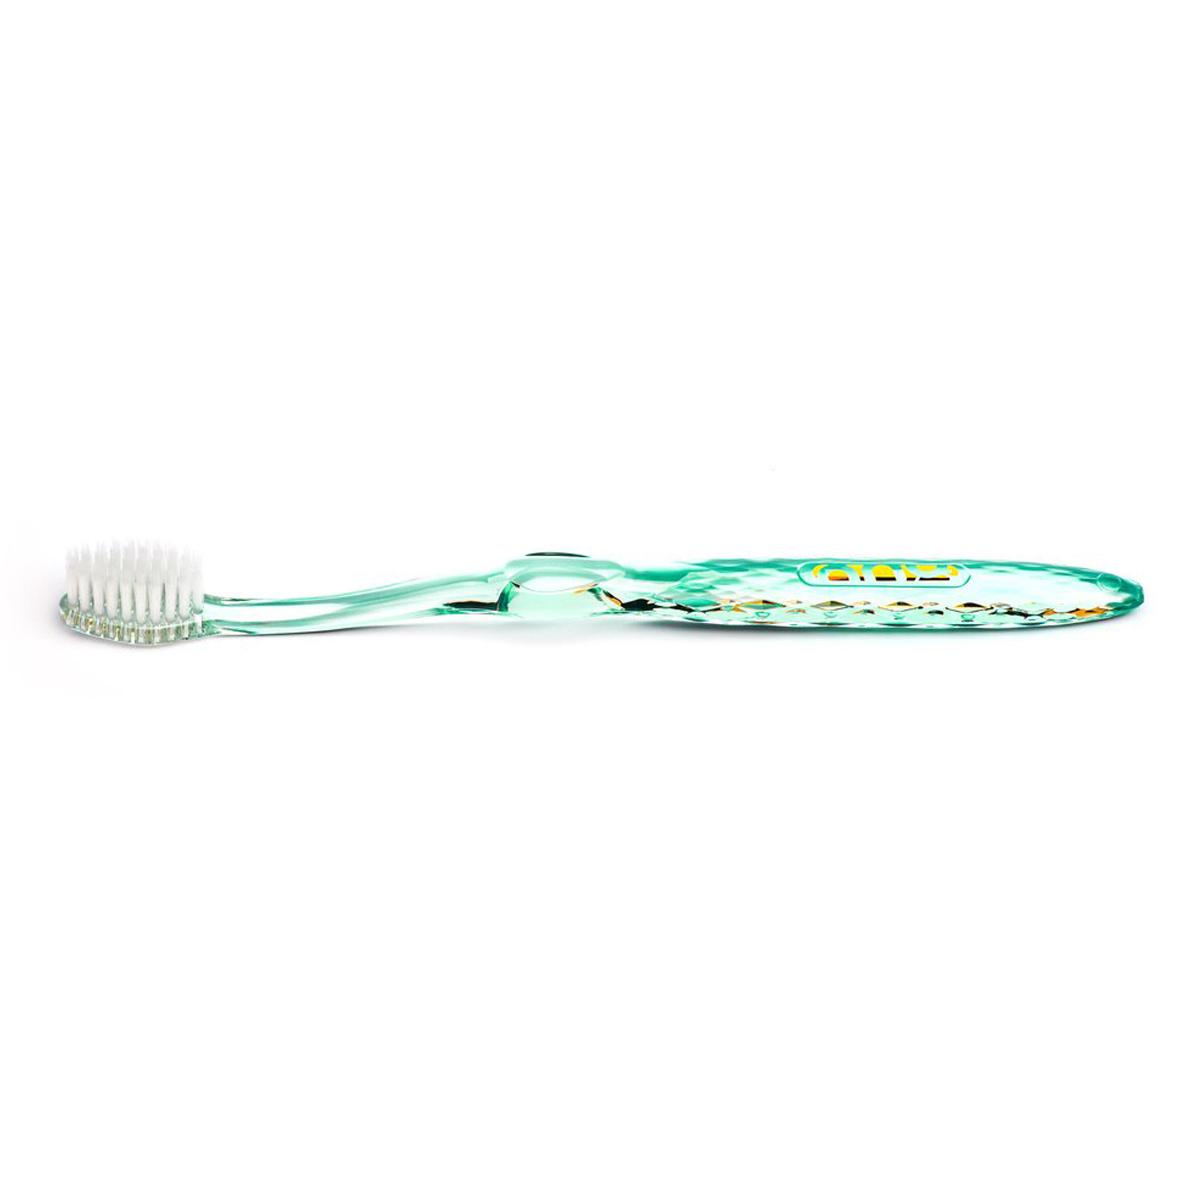 Primary image of Green Silver Toothbrush